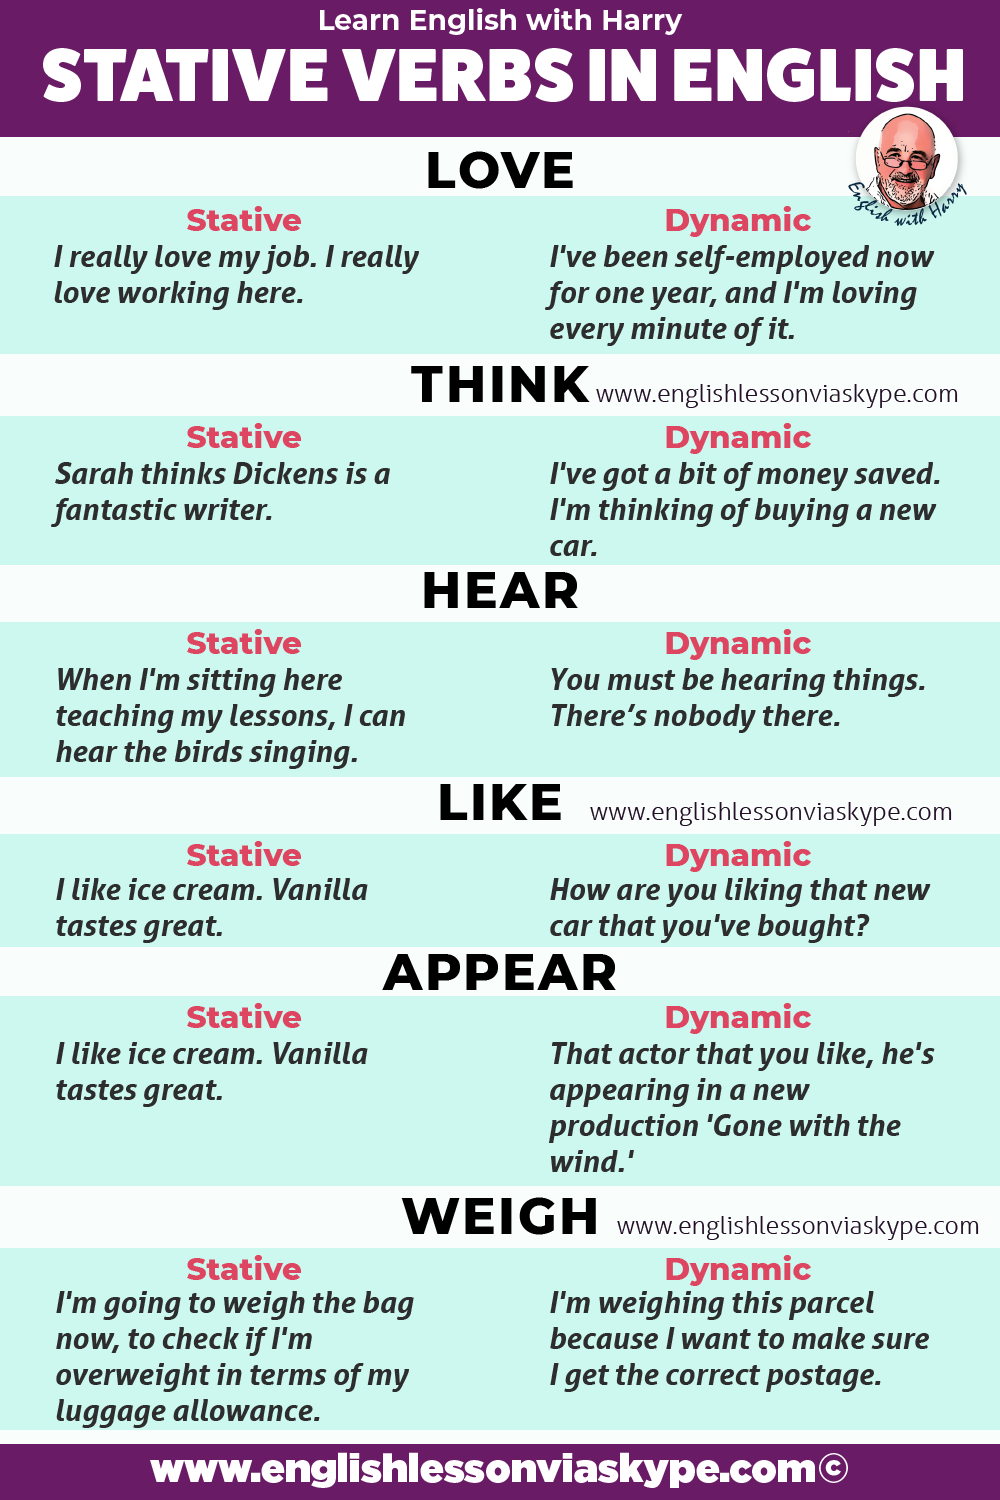 how-to-use-stative-verbs-in-english-speak-better-english-with-harry